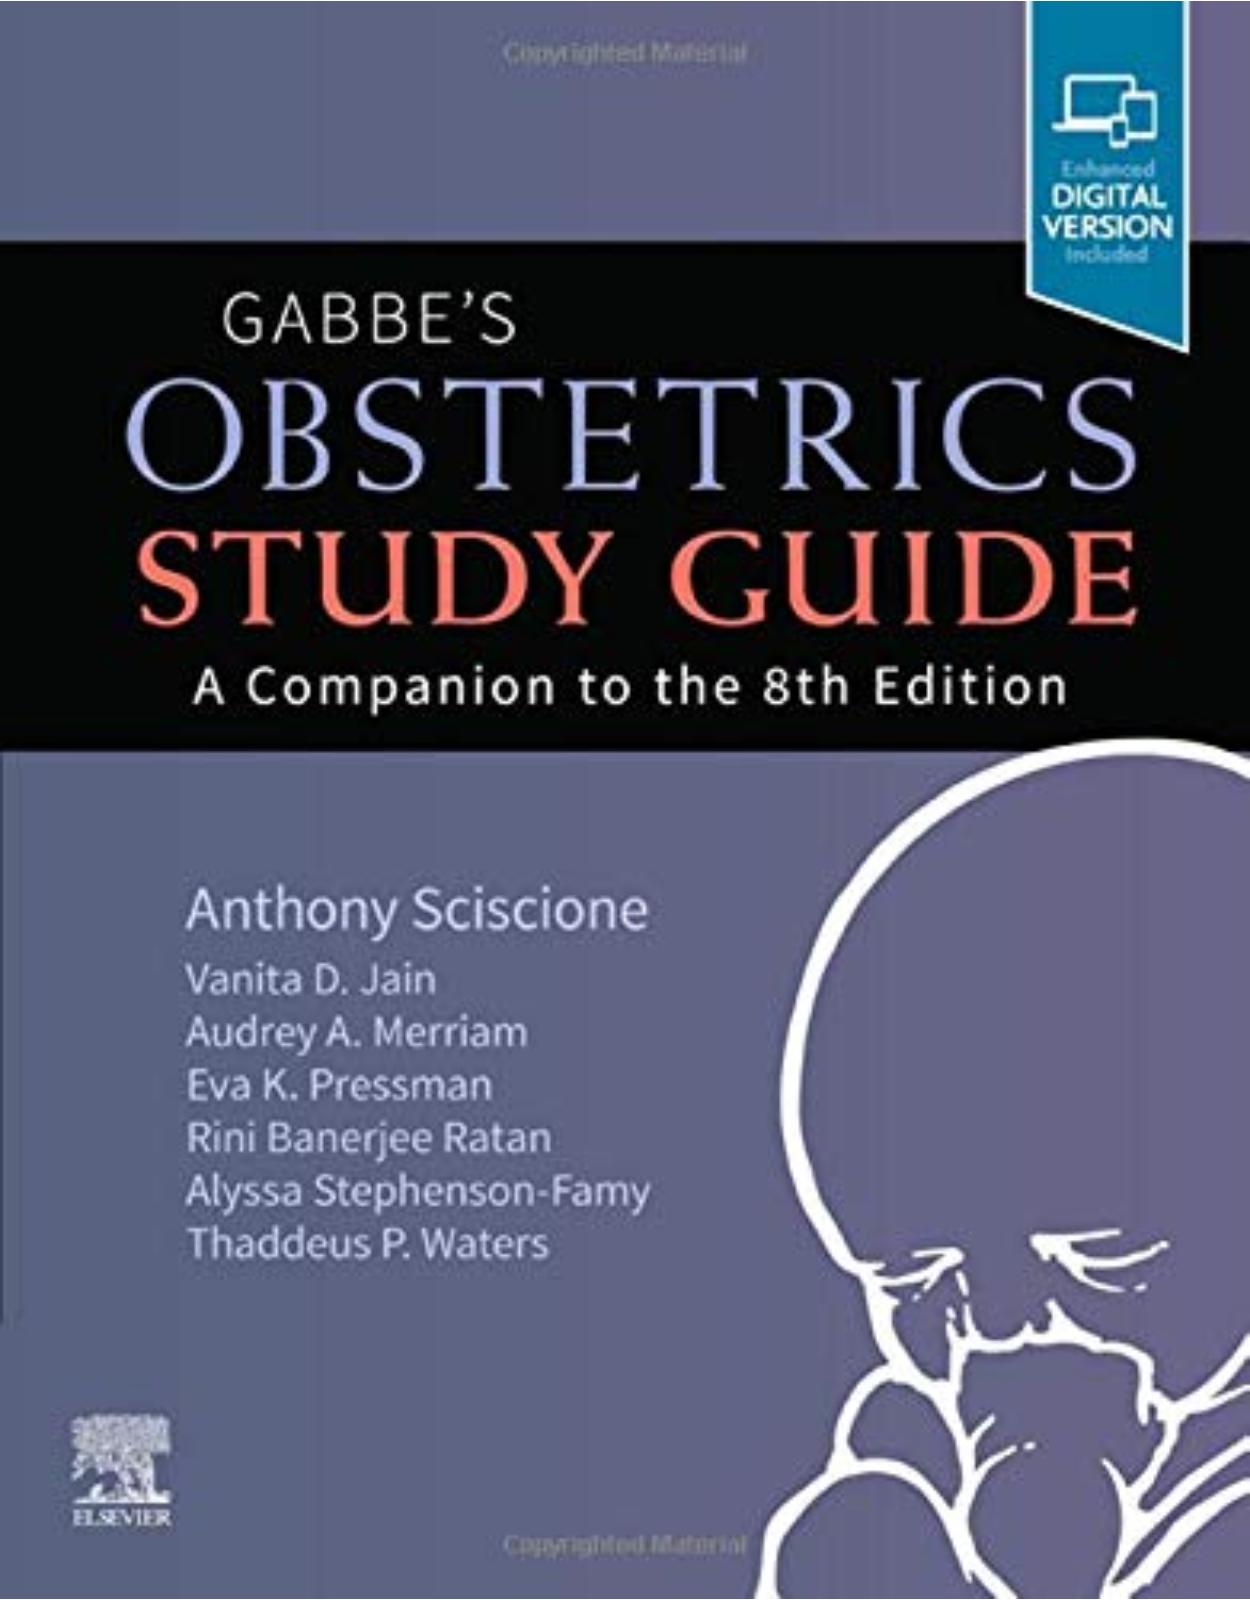 Gabbe’s Obstetrics Study Guide: A Companion to the 8th Edition